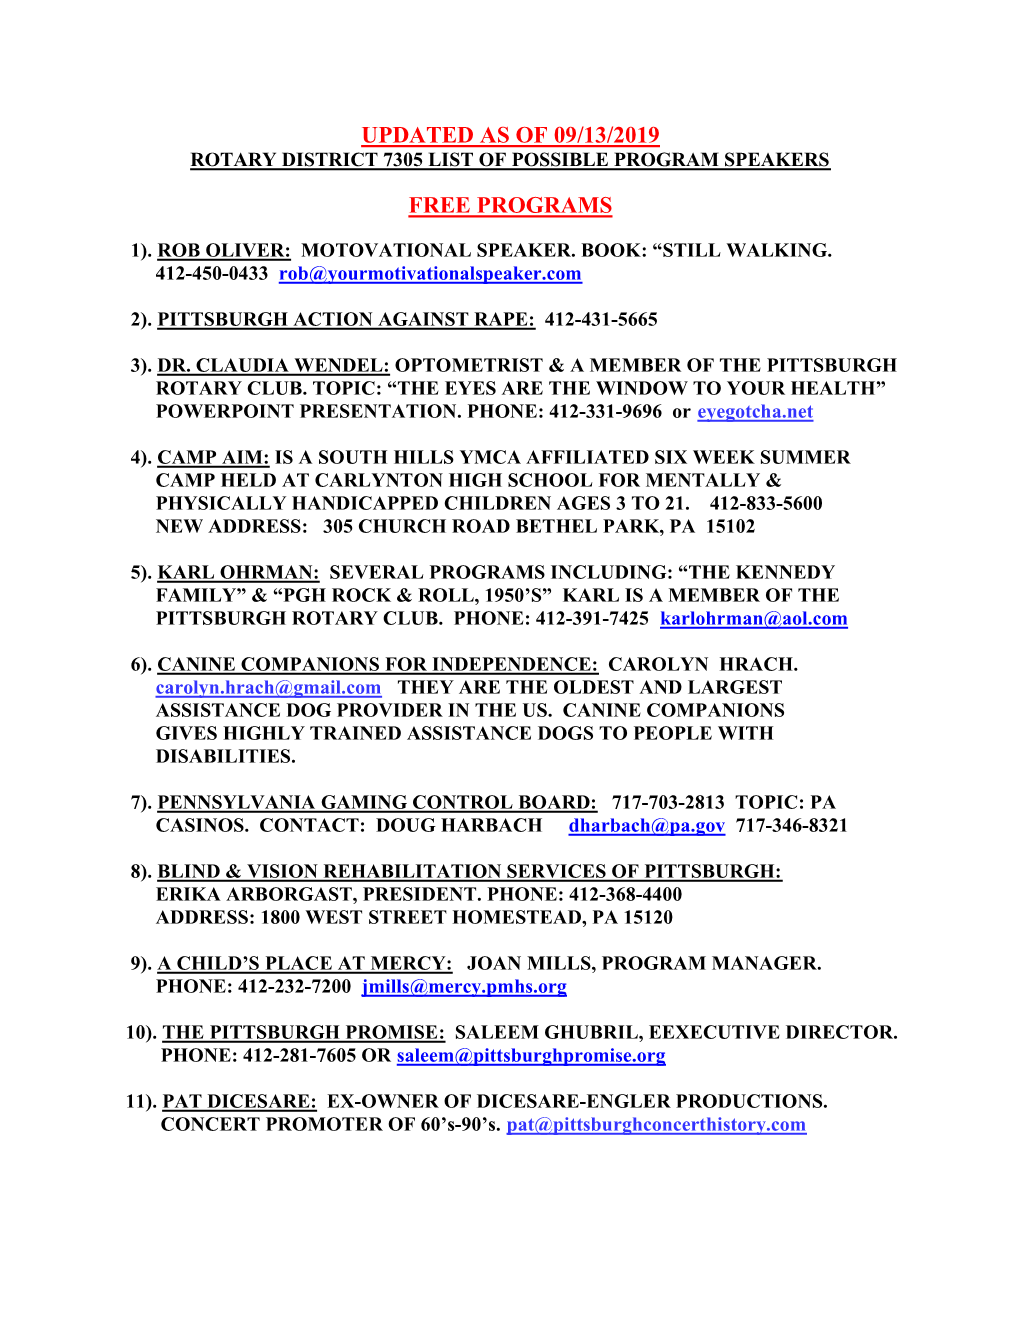 Updated As of 09/13/2019 Free Programs